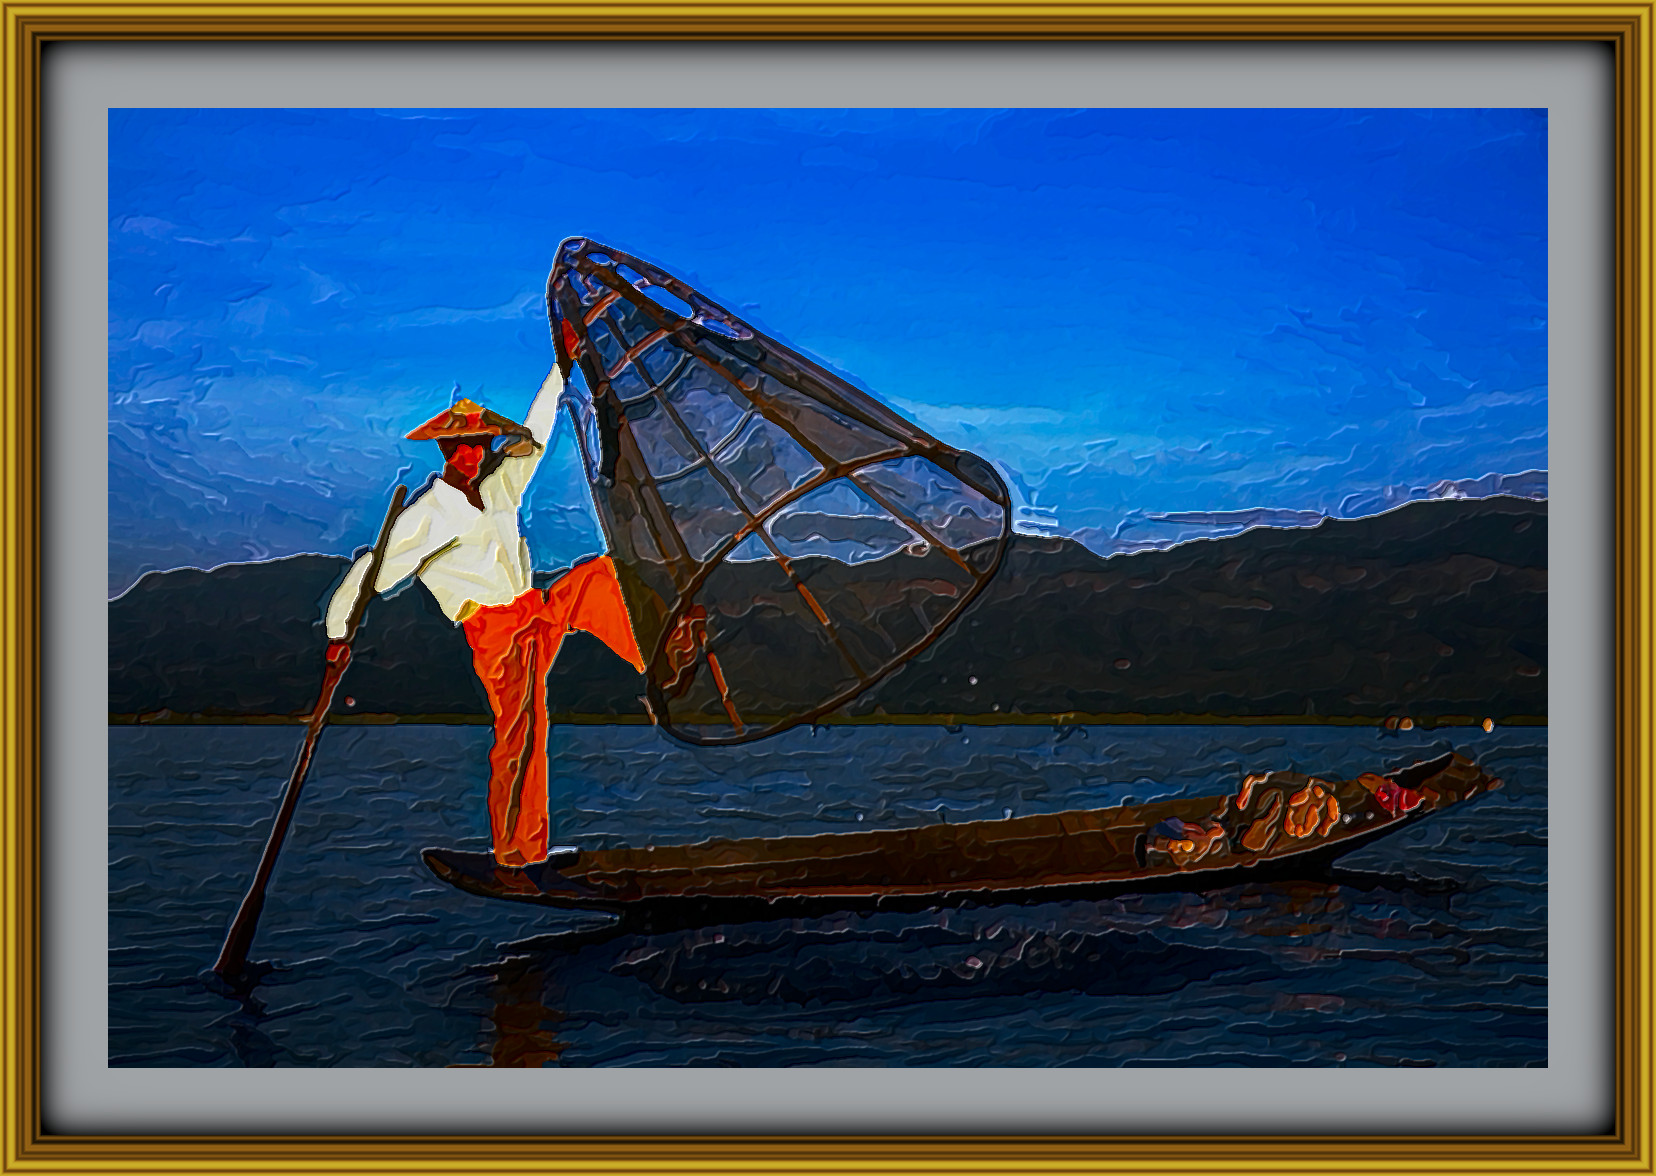 2024-02-15 10-13-32 Inle_Lake_Fisherman_Myanmar_Colby_Brown_3 with JVID Embossed Graphic Effect, parms=1, 127.0, 6.0, 8.0, 7.5, 9.85, 1.5, 0.0, 0.jpeg